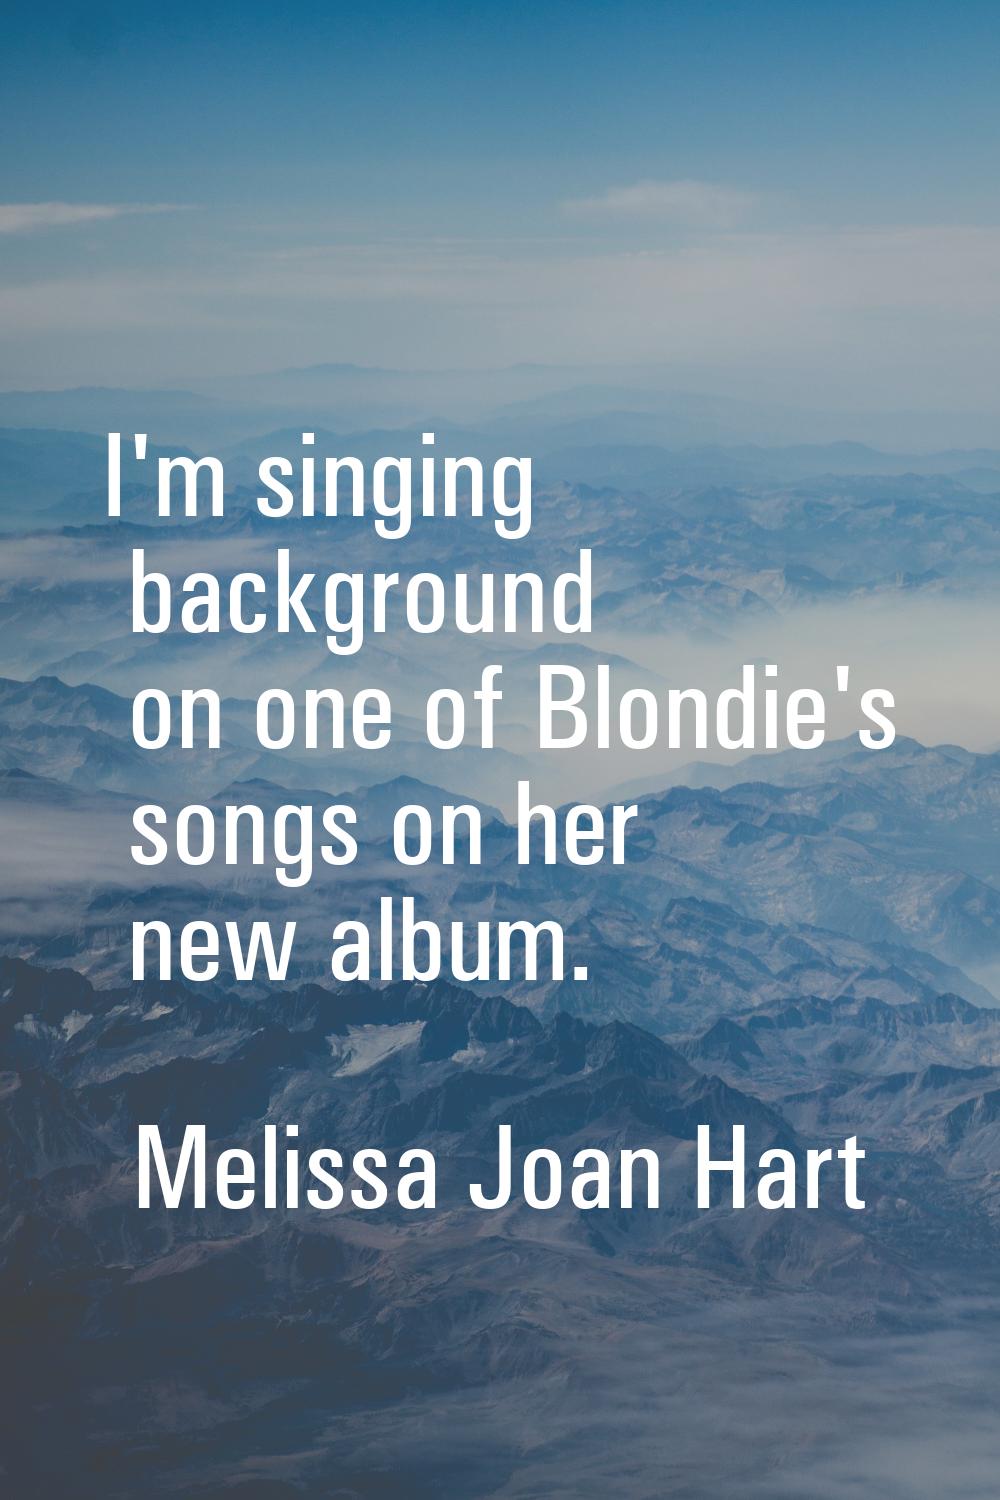 I'm singing background on one of Blondie's songs on her new album.